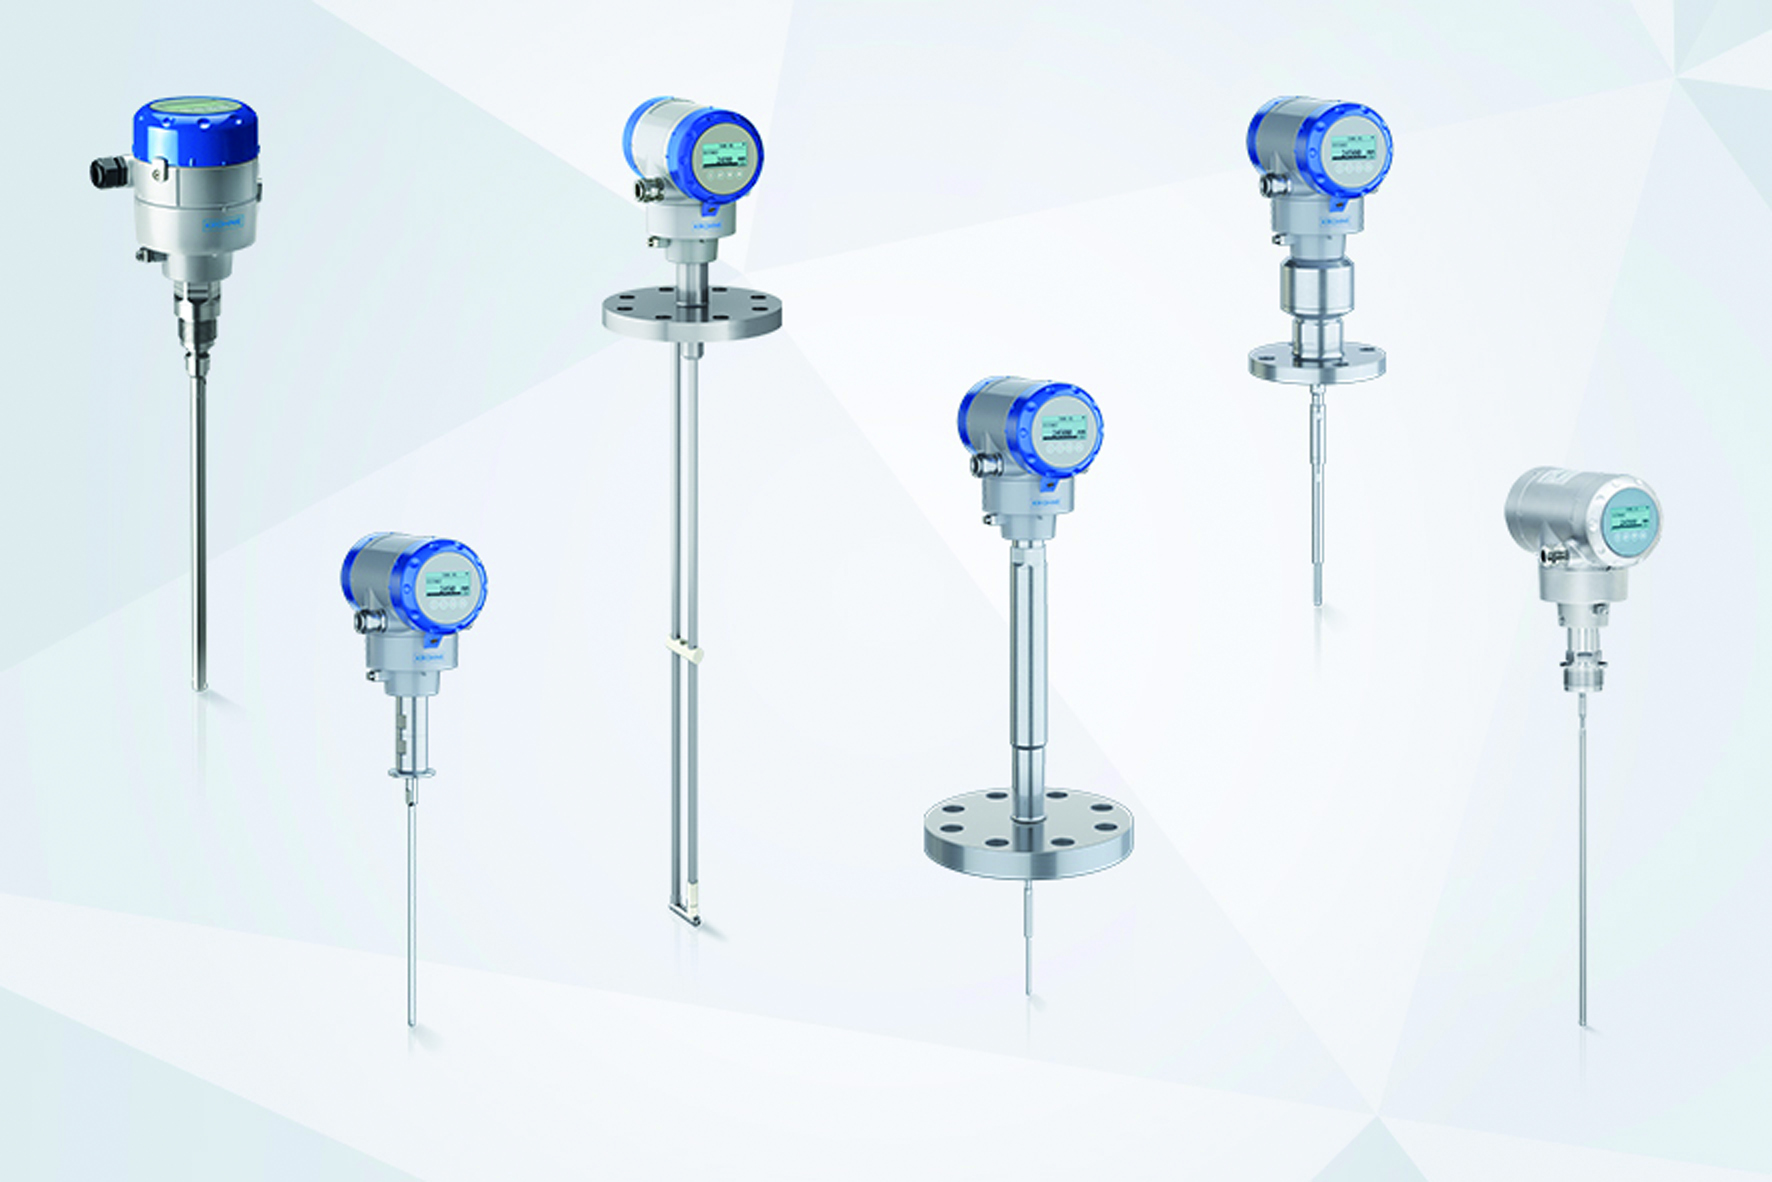 Each of the four additions to the Optiflex series are for specific applications in the chemical, oil & gas, power, metals, minerals & mining, pharmaceutical or food & beverage industries.